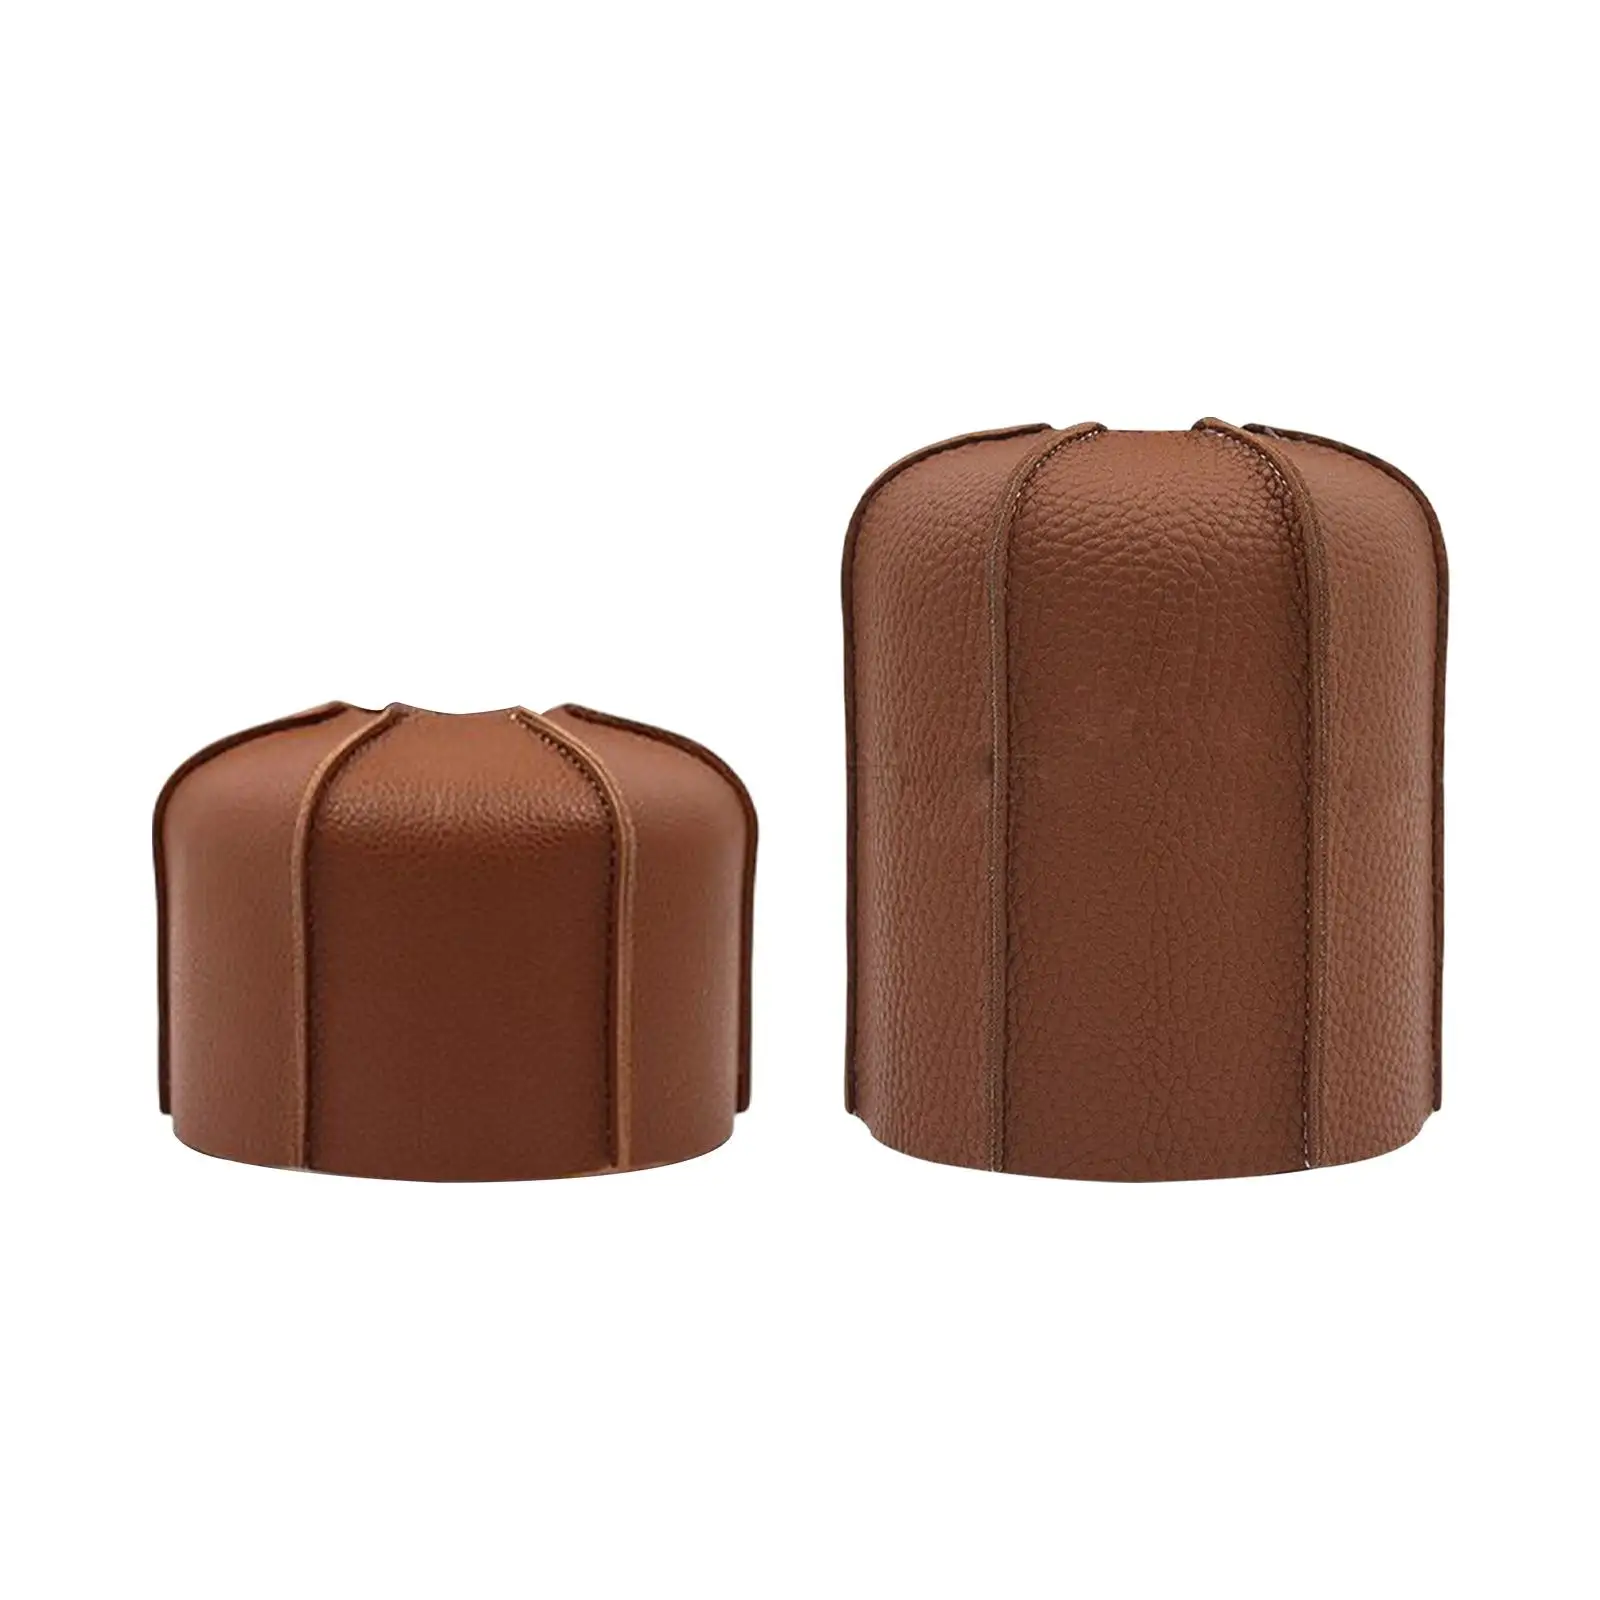 PU Leather Gas Canister Cover Gas Cylinder Tank Cover Protector for Hiking BBQ